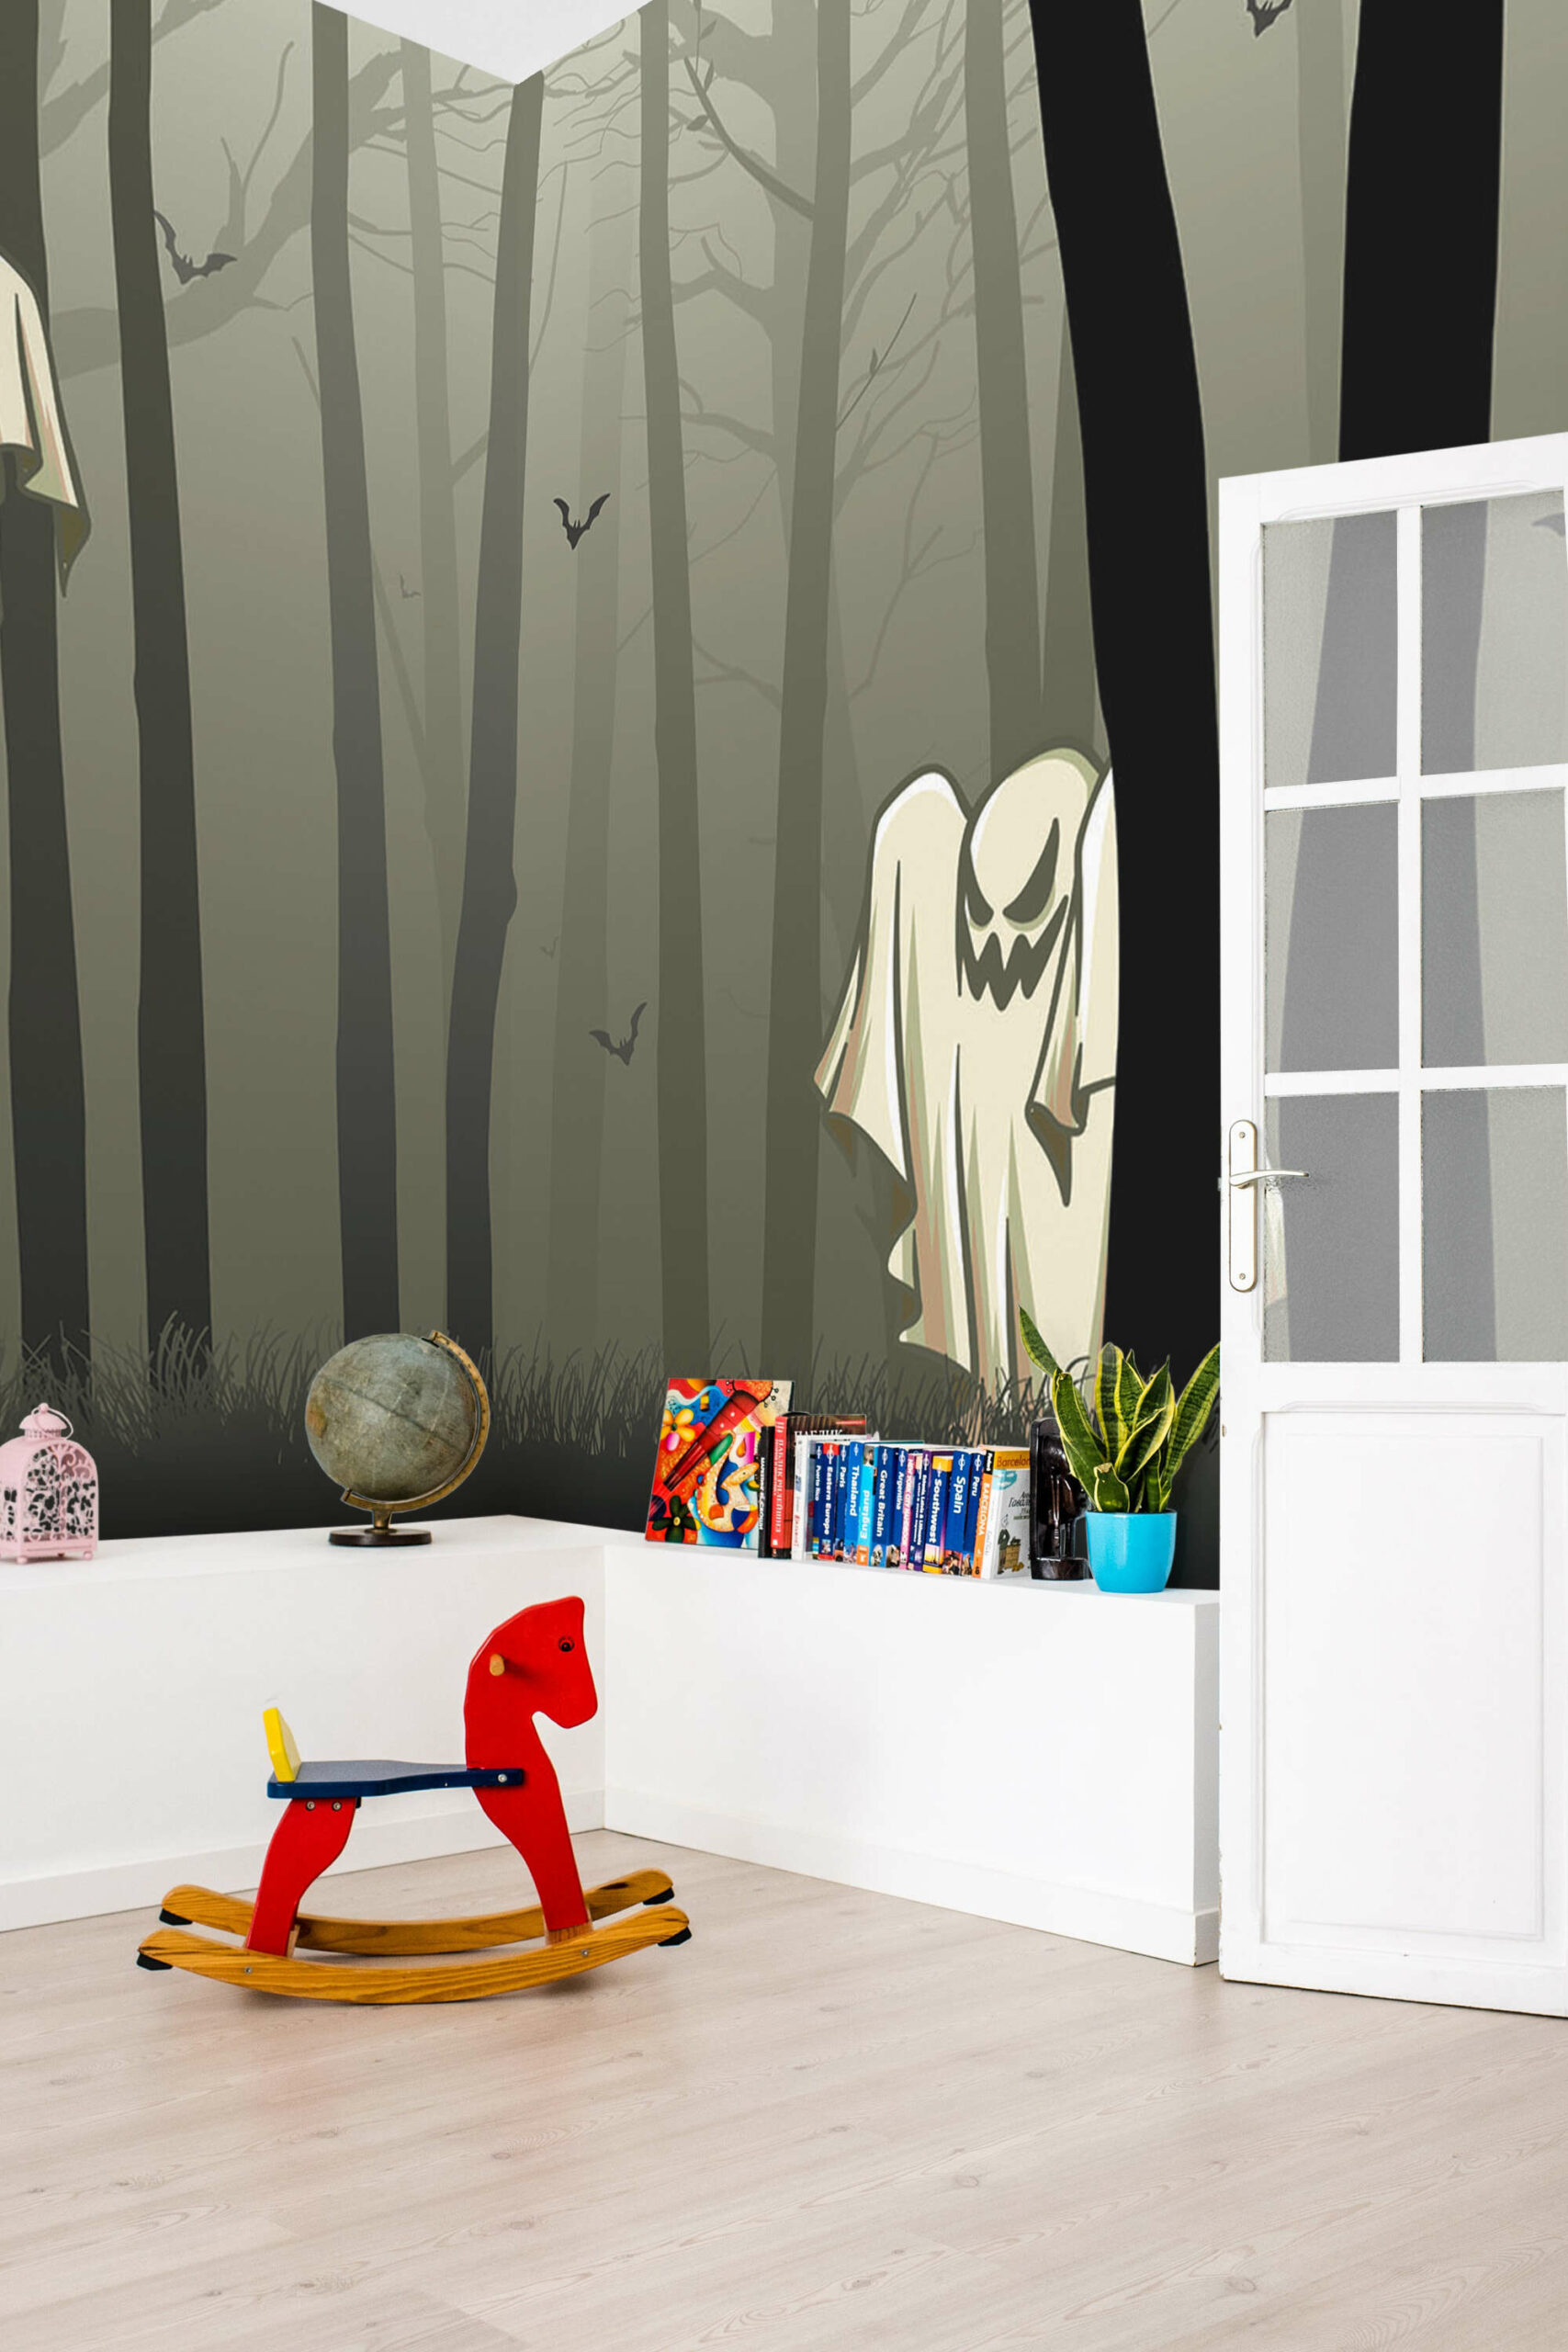 Spooky Halloween Forest Wall Mural - Peel and Stick or Non-Pasted